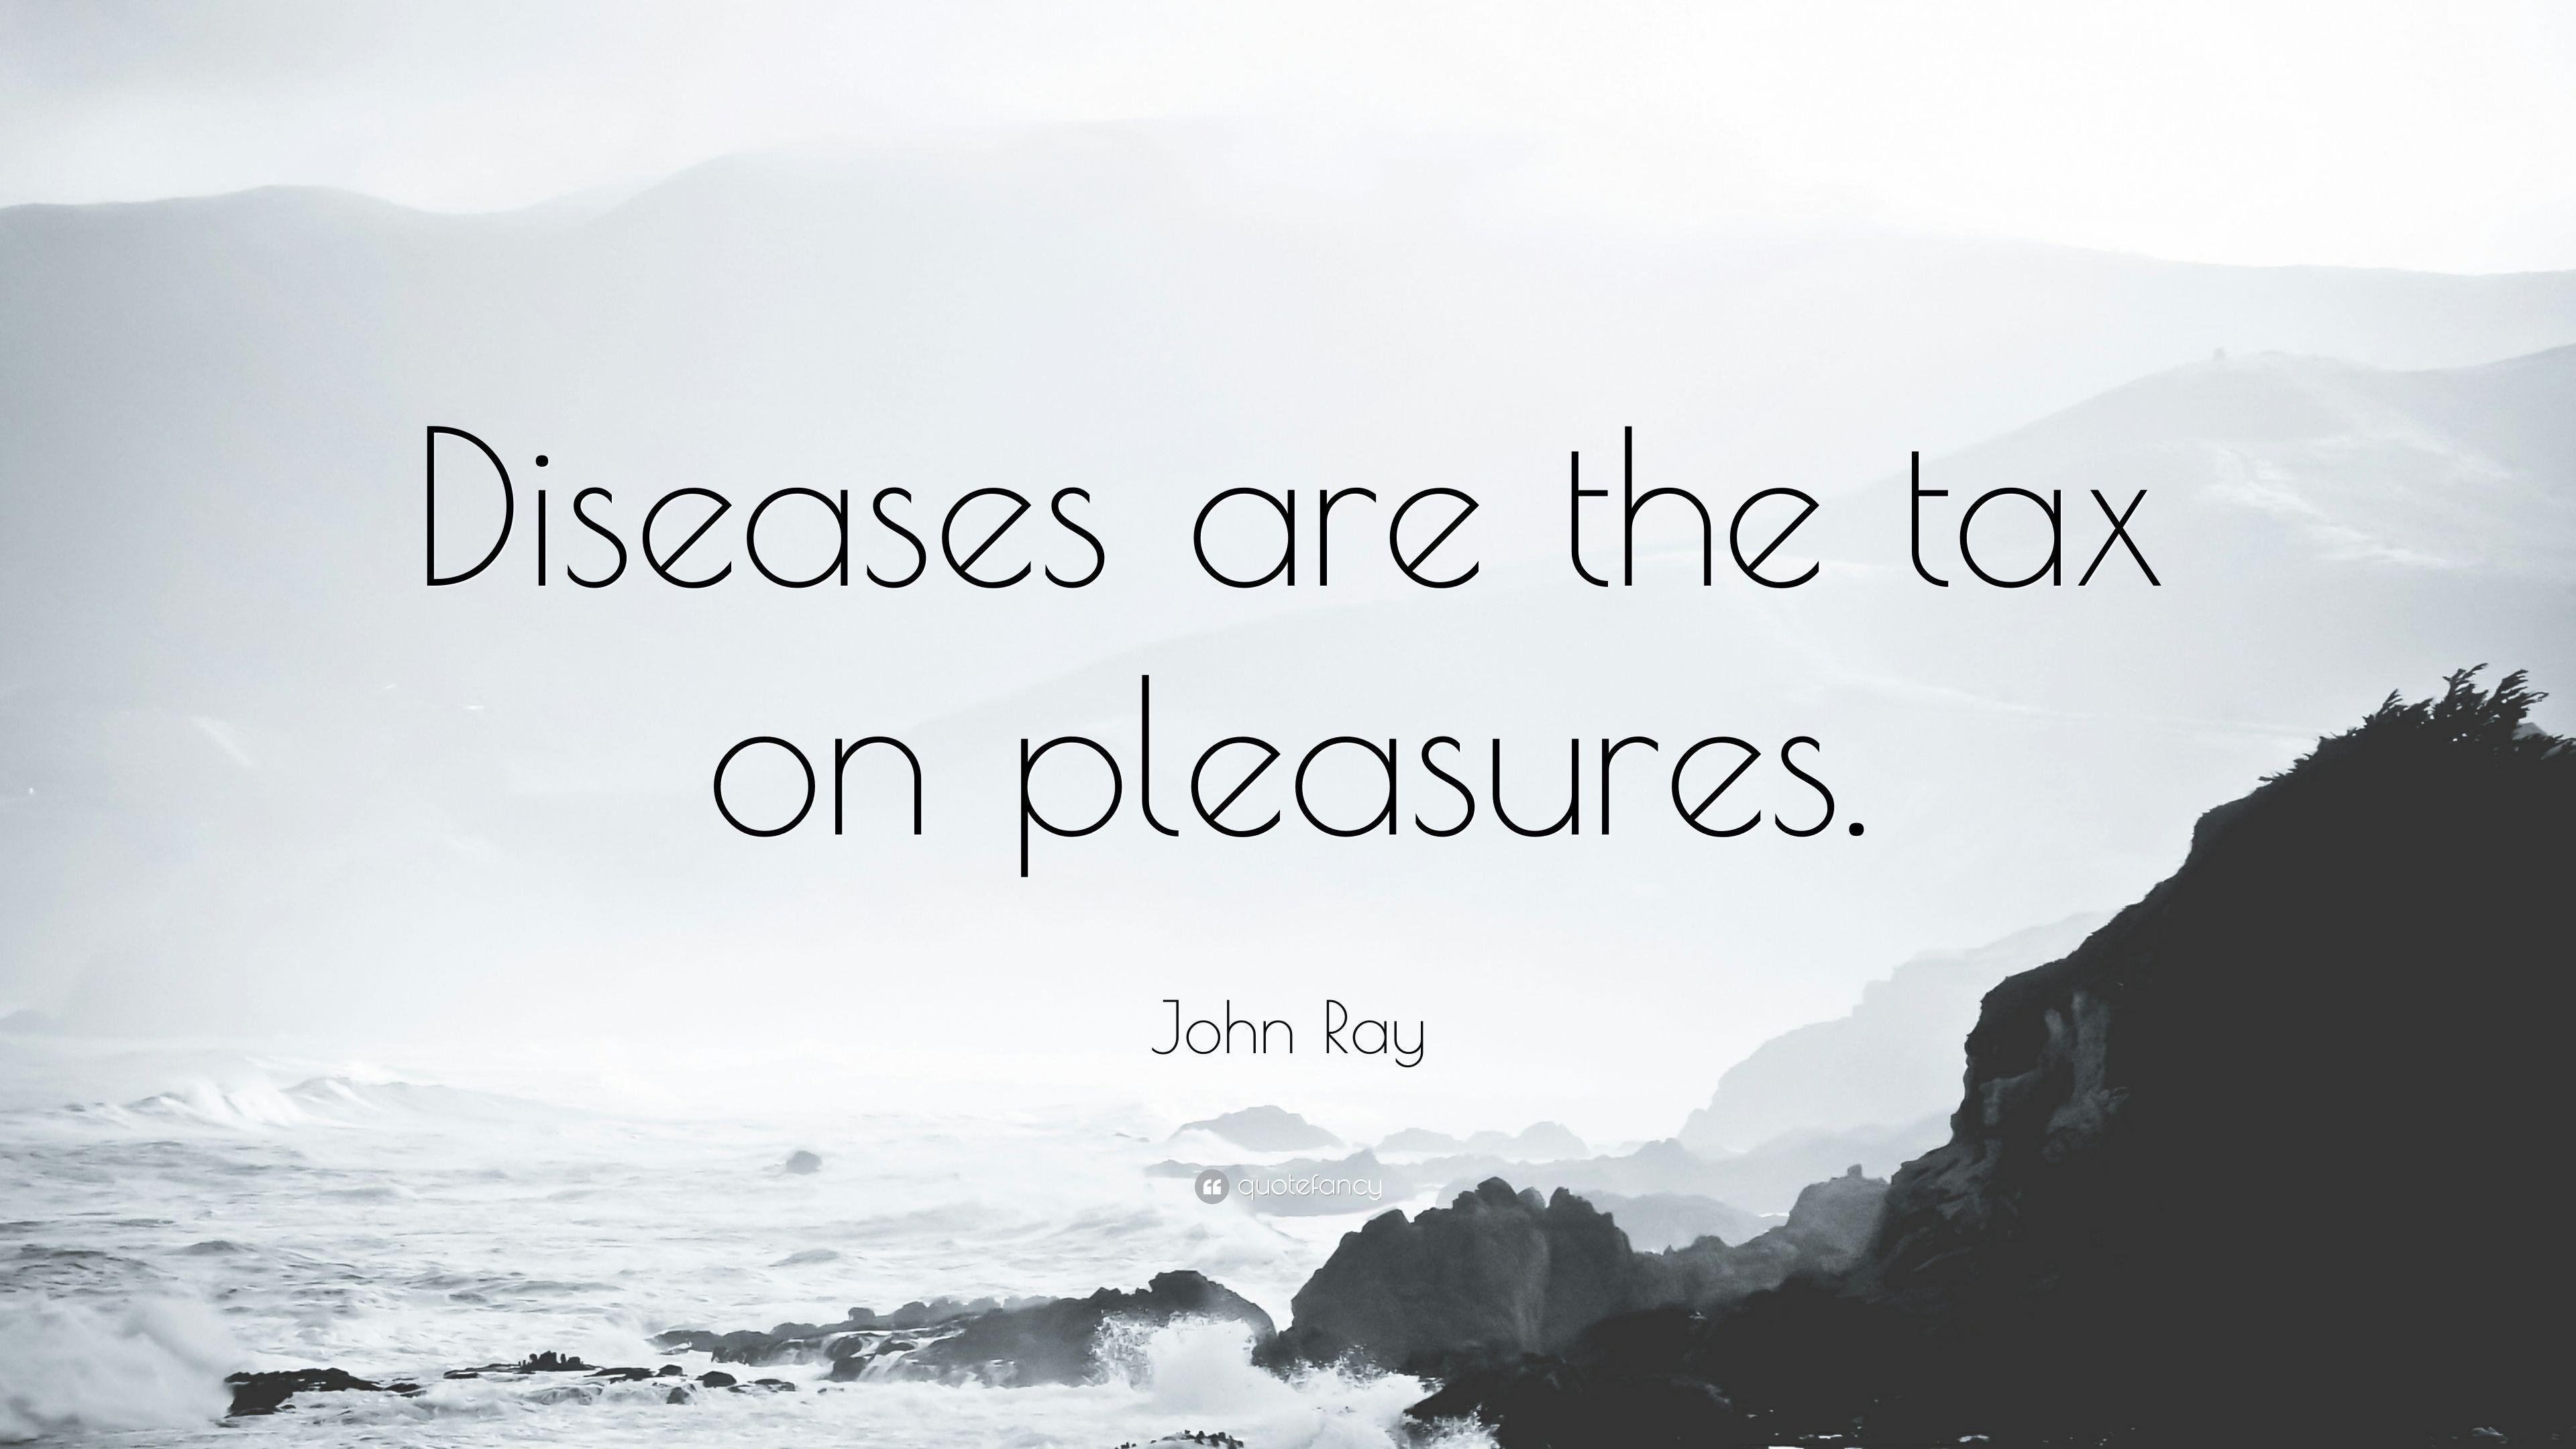 John Ray Quote: “Diseases are the tax on pleasures.” 10 wallpaper